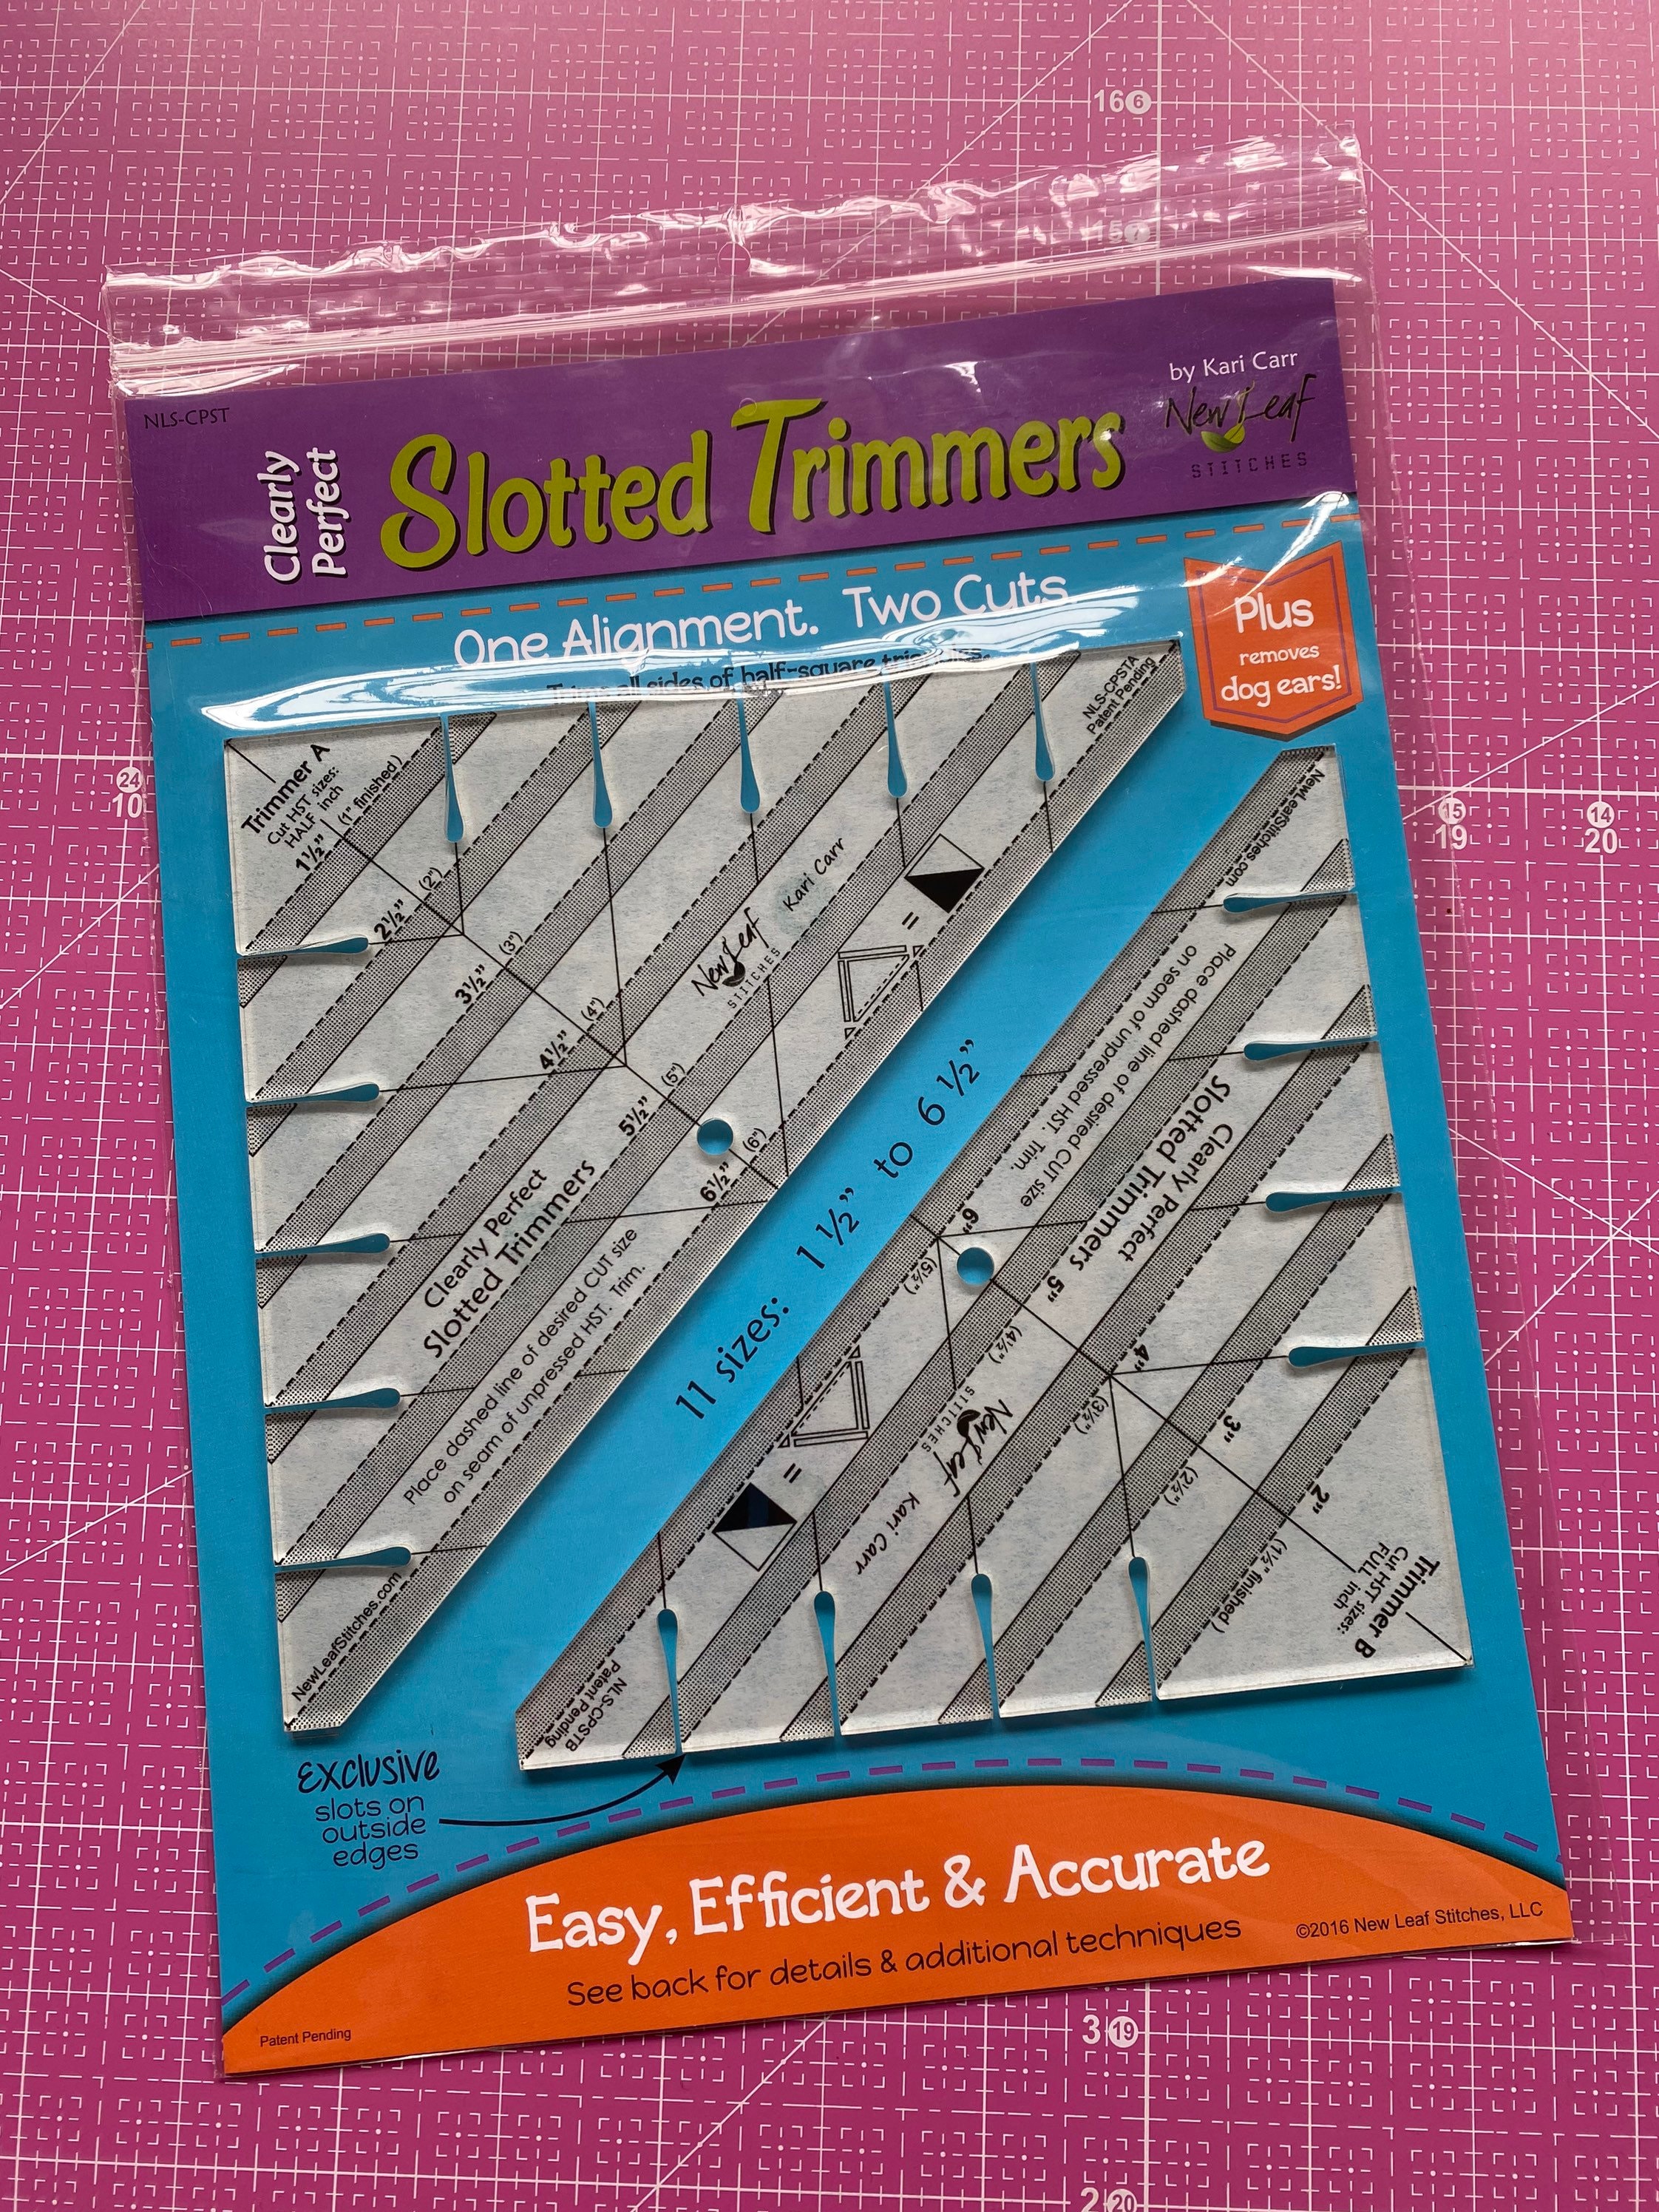 Check out the “Clearly Perfect Slotted Trimmers” which make HSTs a bre